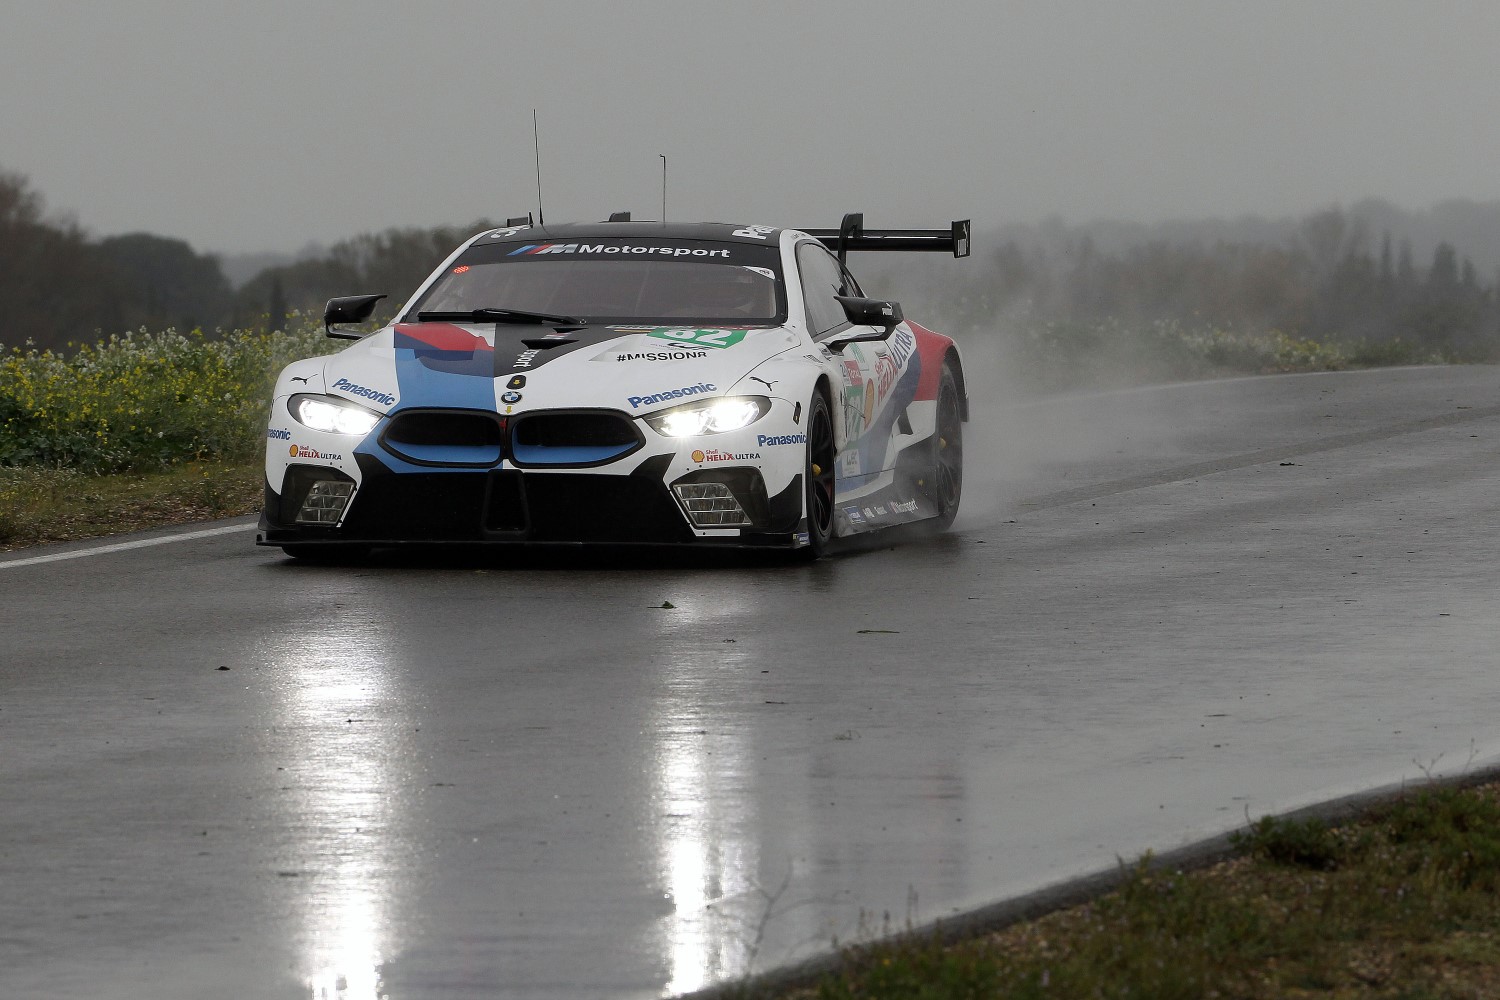 Testing in the wet